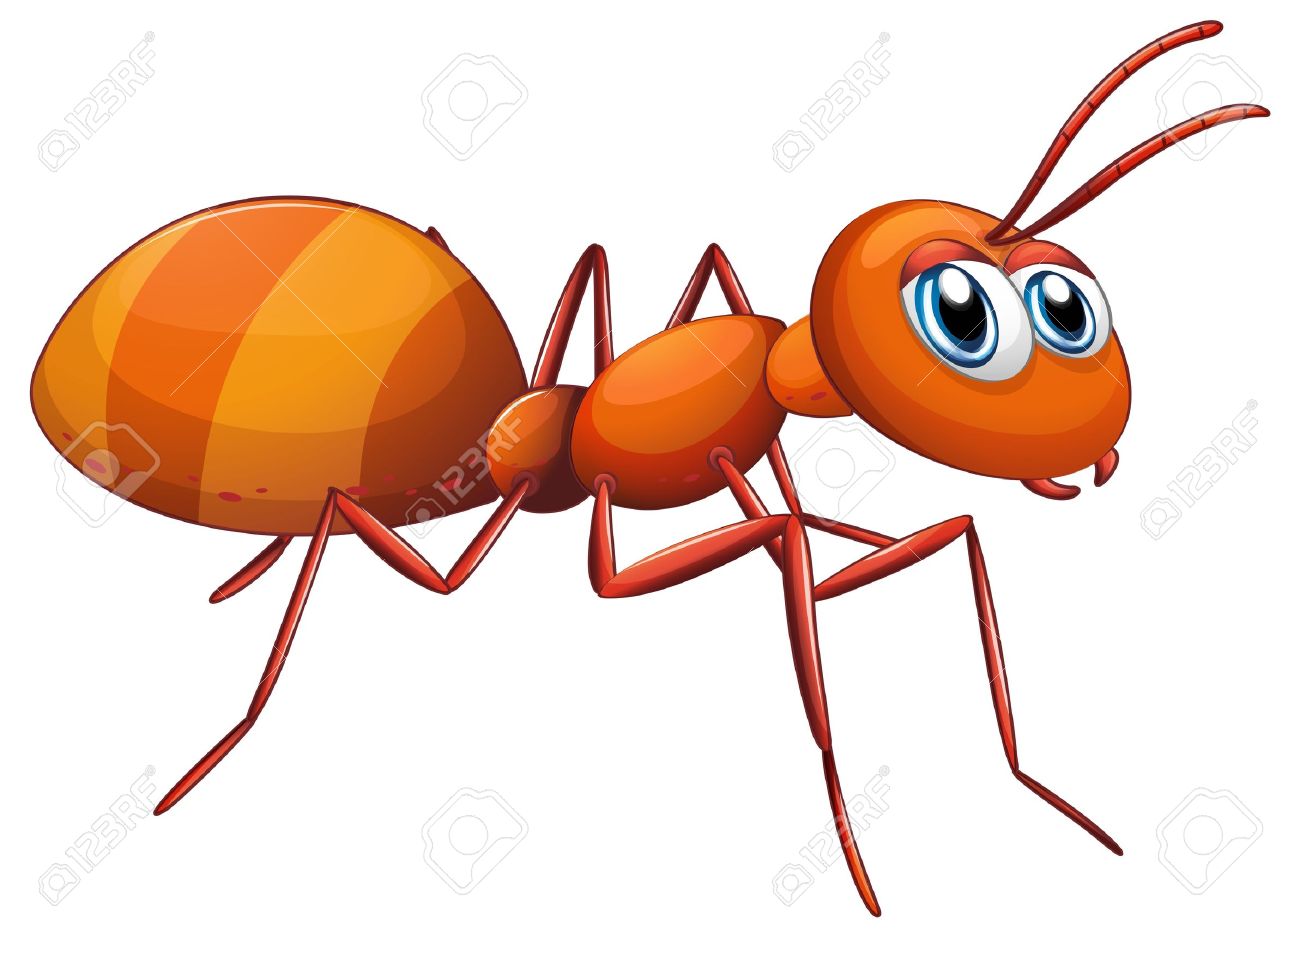 Ants cake . Ant clipart friendly